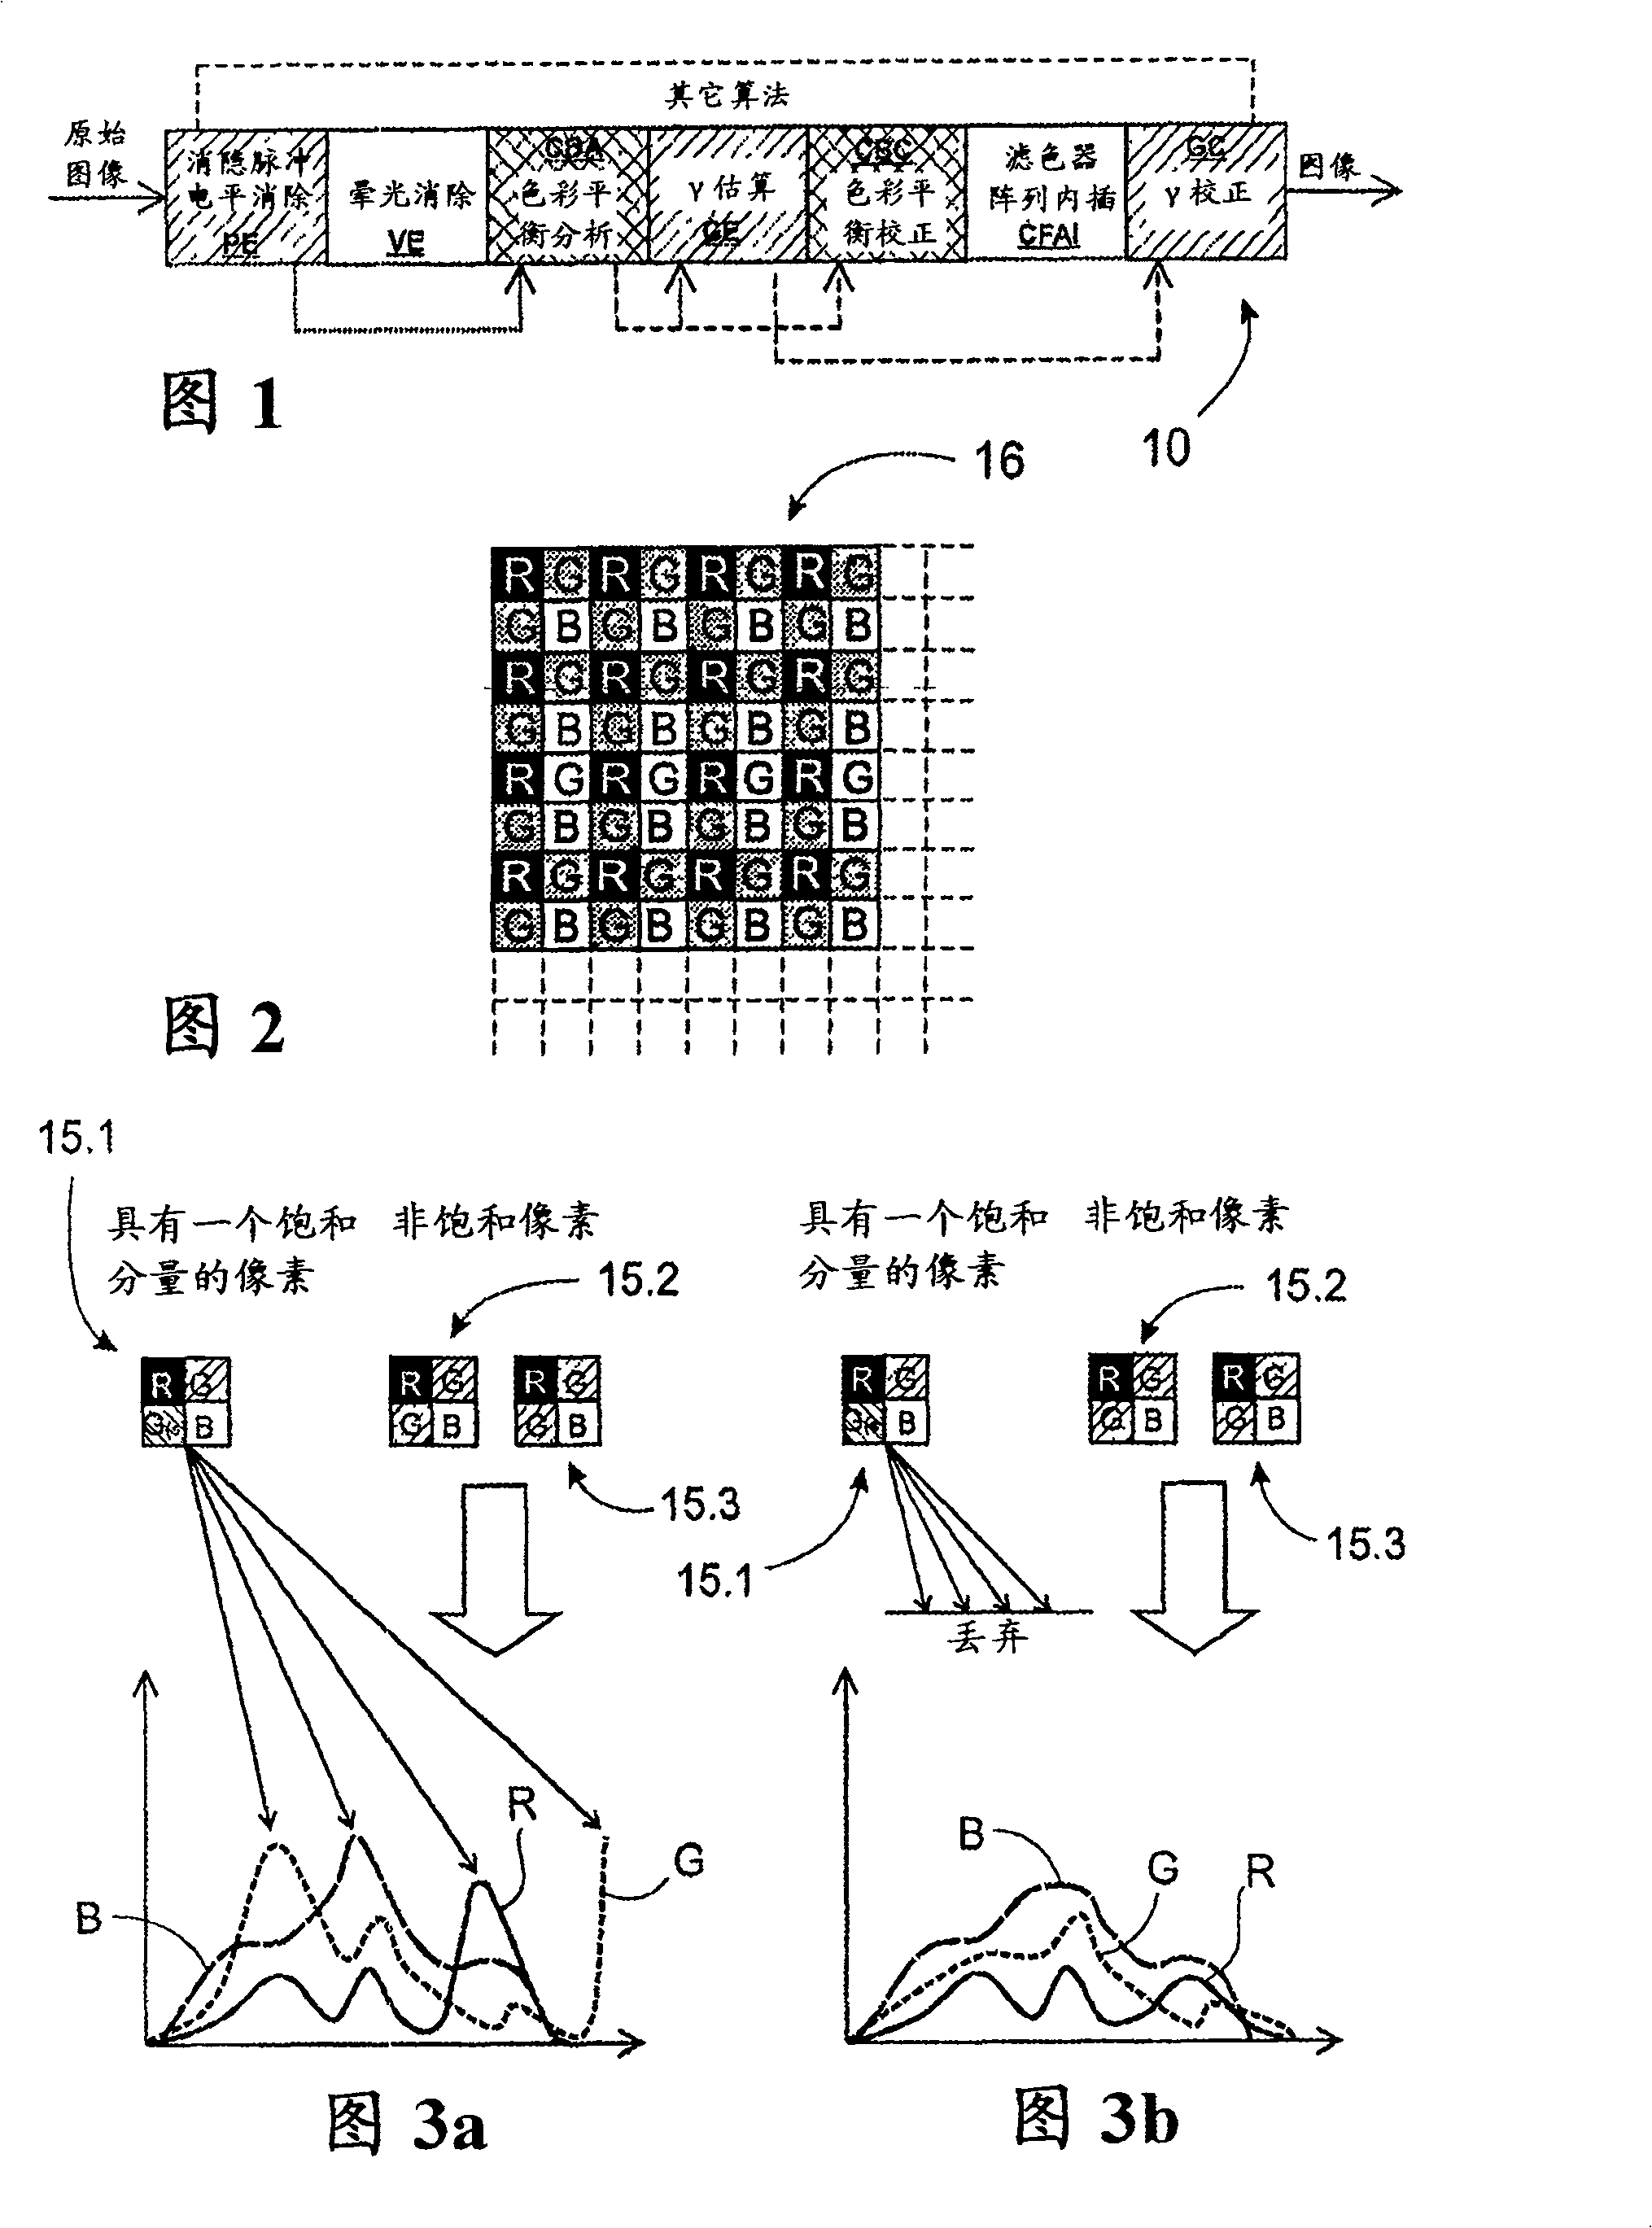 Method and system in a digital image processing chain for adjusting a colour balance, corresponding equipment, and software means for implementing the method